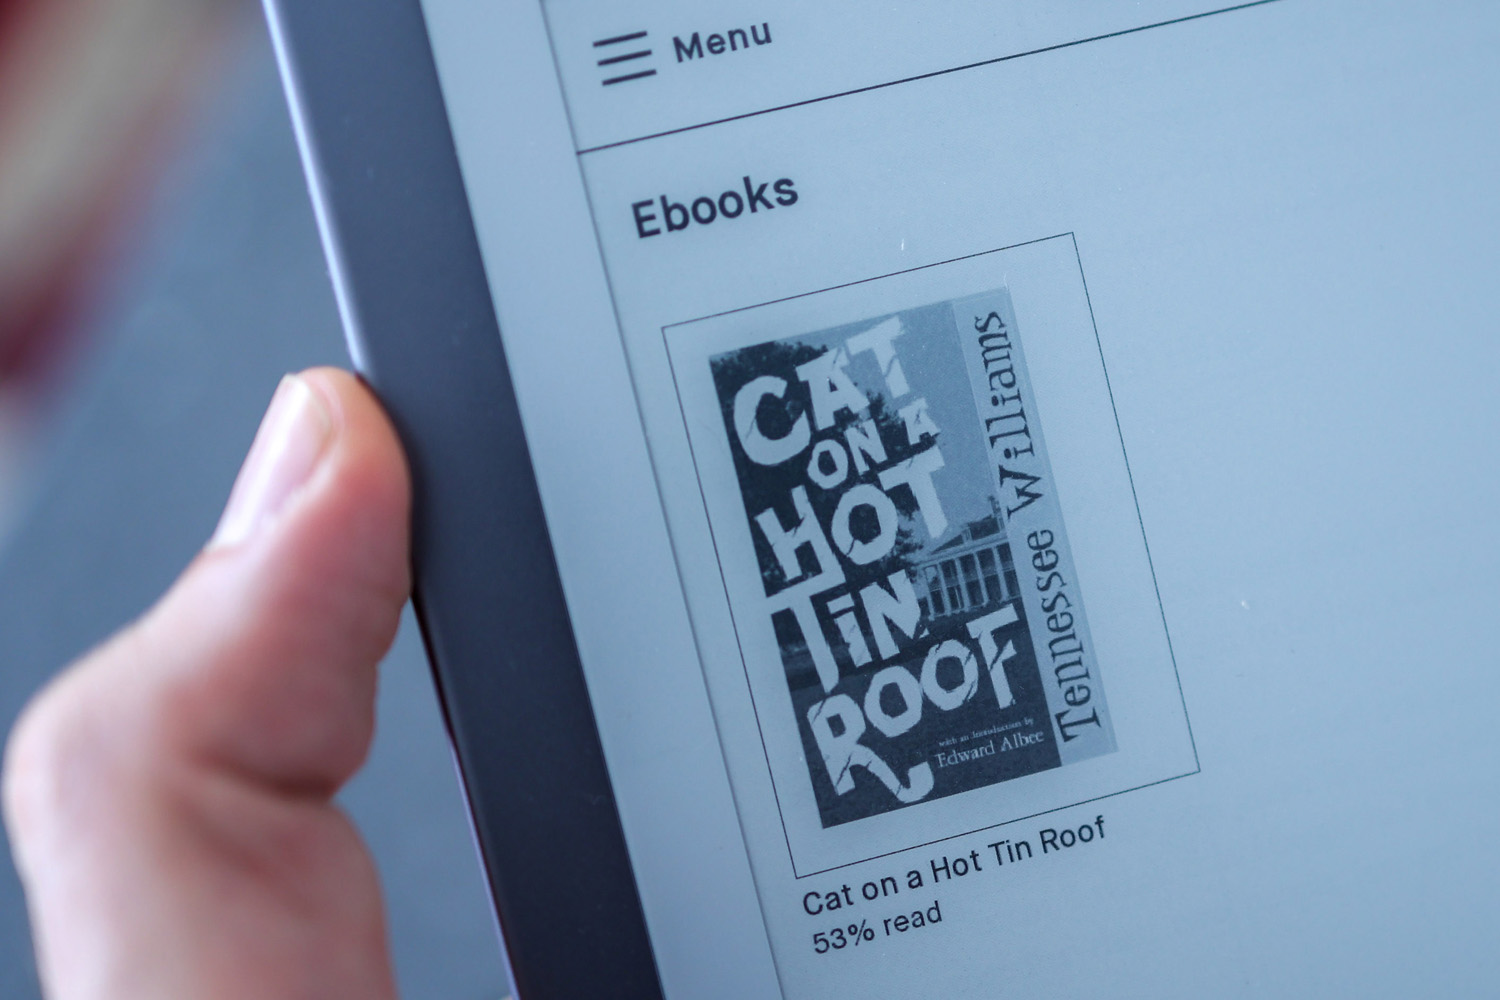 reMarkable 2 e-reader displaying ebook library